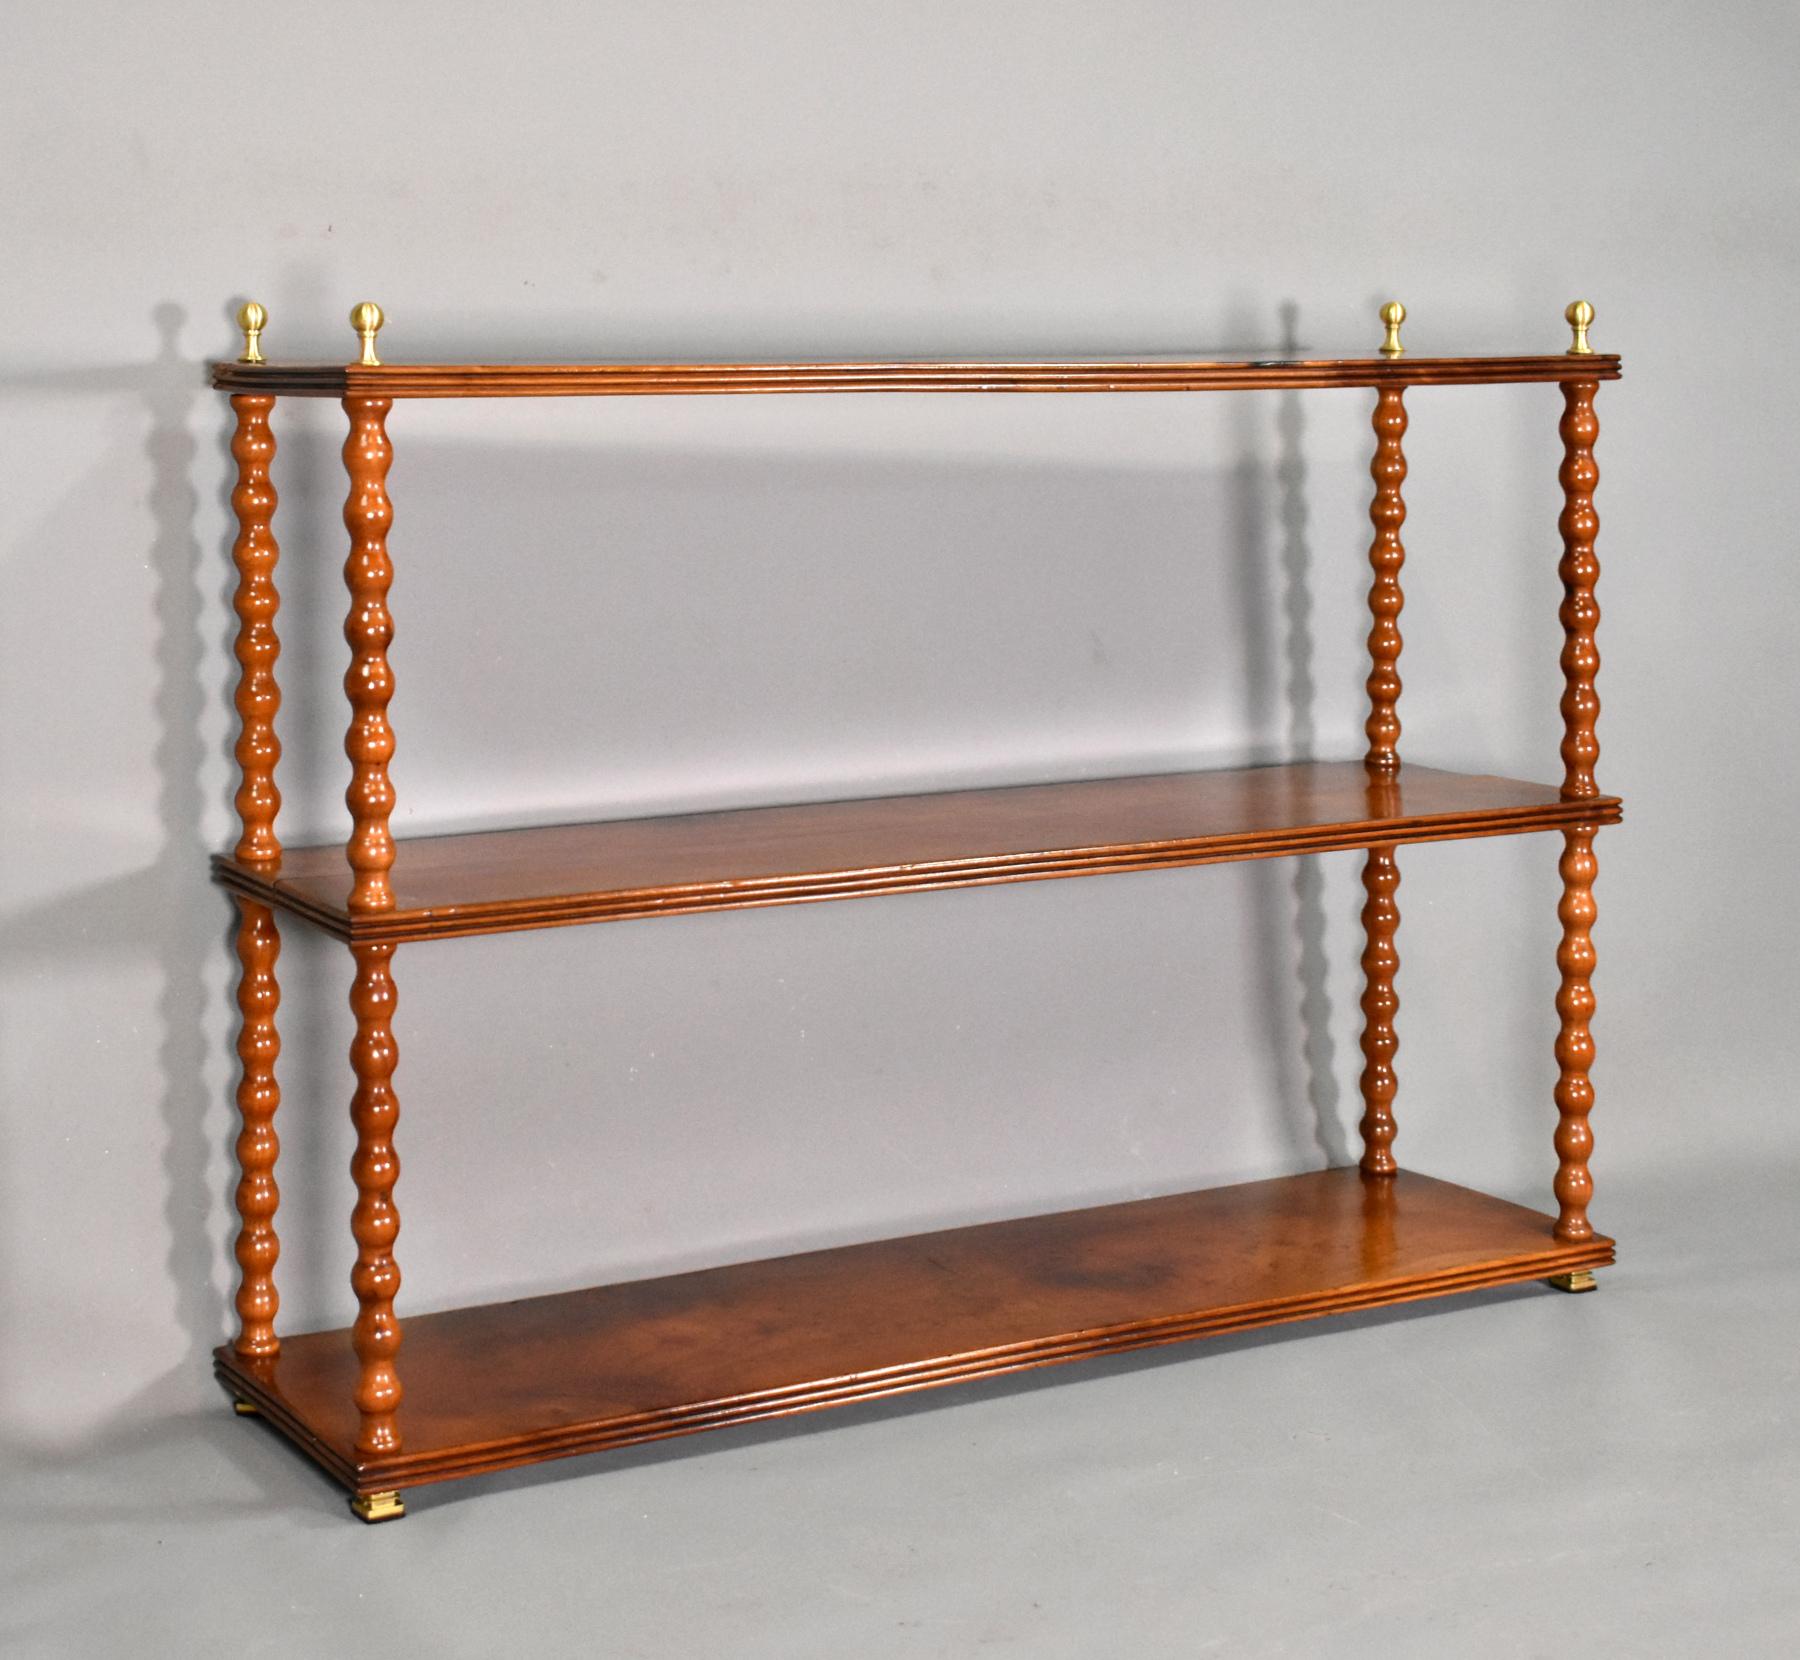 Antique French Shelving Unit in Cherry Wood